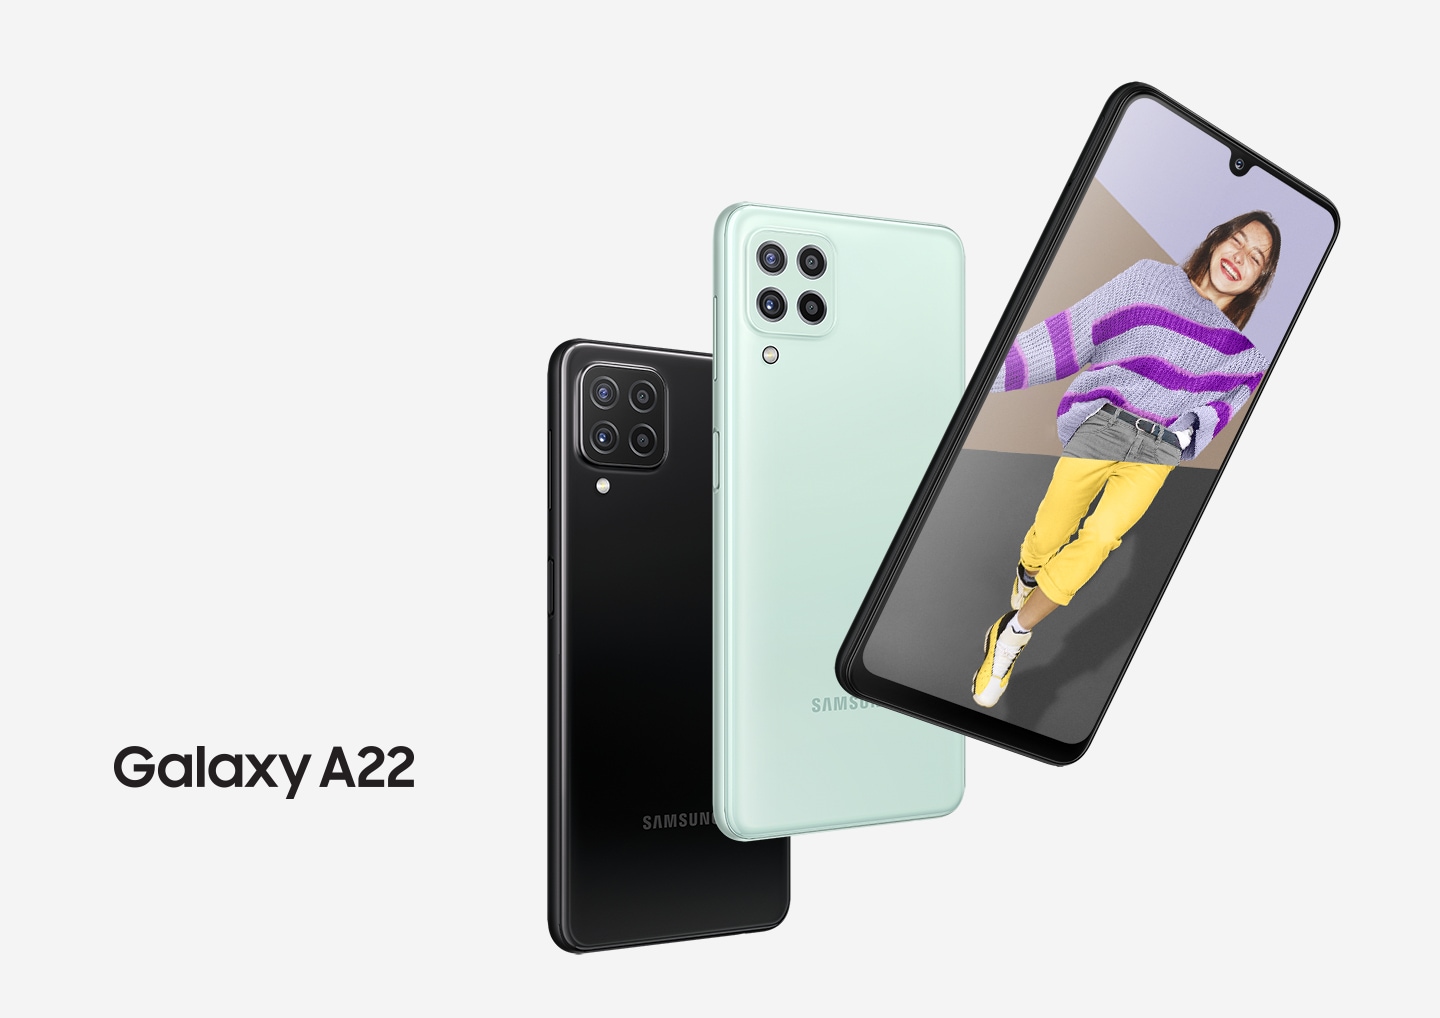 Three Galaxy A22 phones in a row. Two seen from the rear to show the rear camera and the colors black and mint. One seen from the front, and onscreen is a collage of a woman's head, a purple striped sweater and yellow pants with the word Awesome.